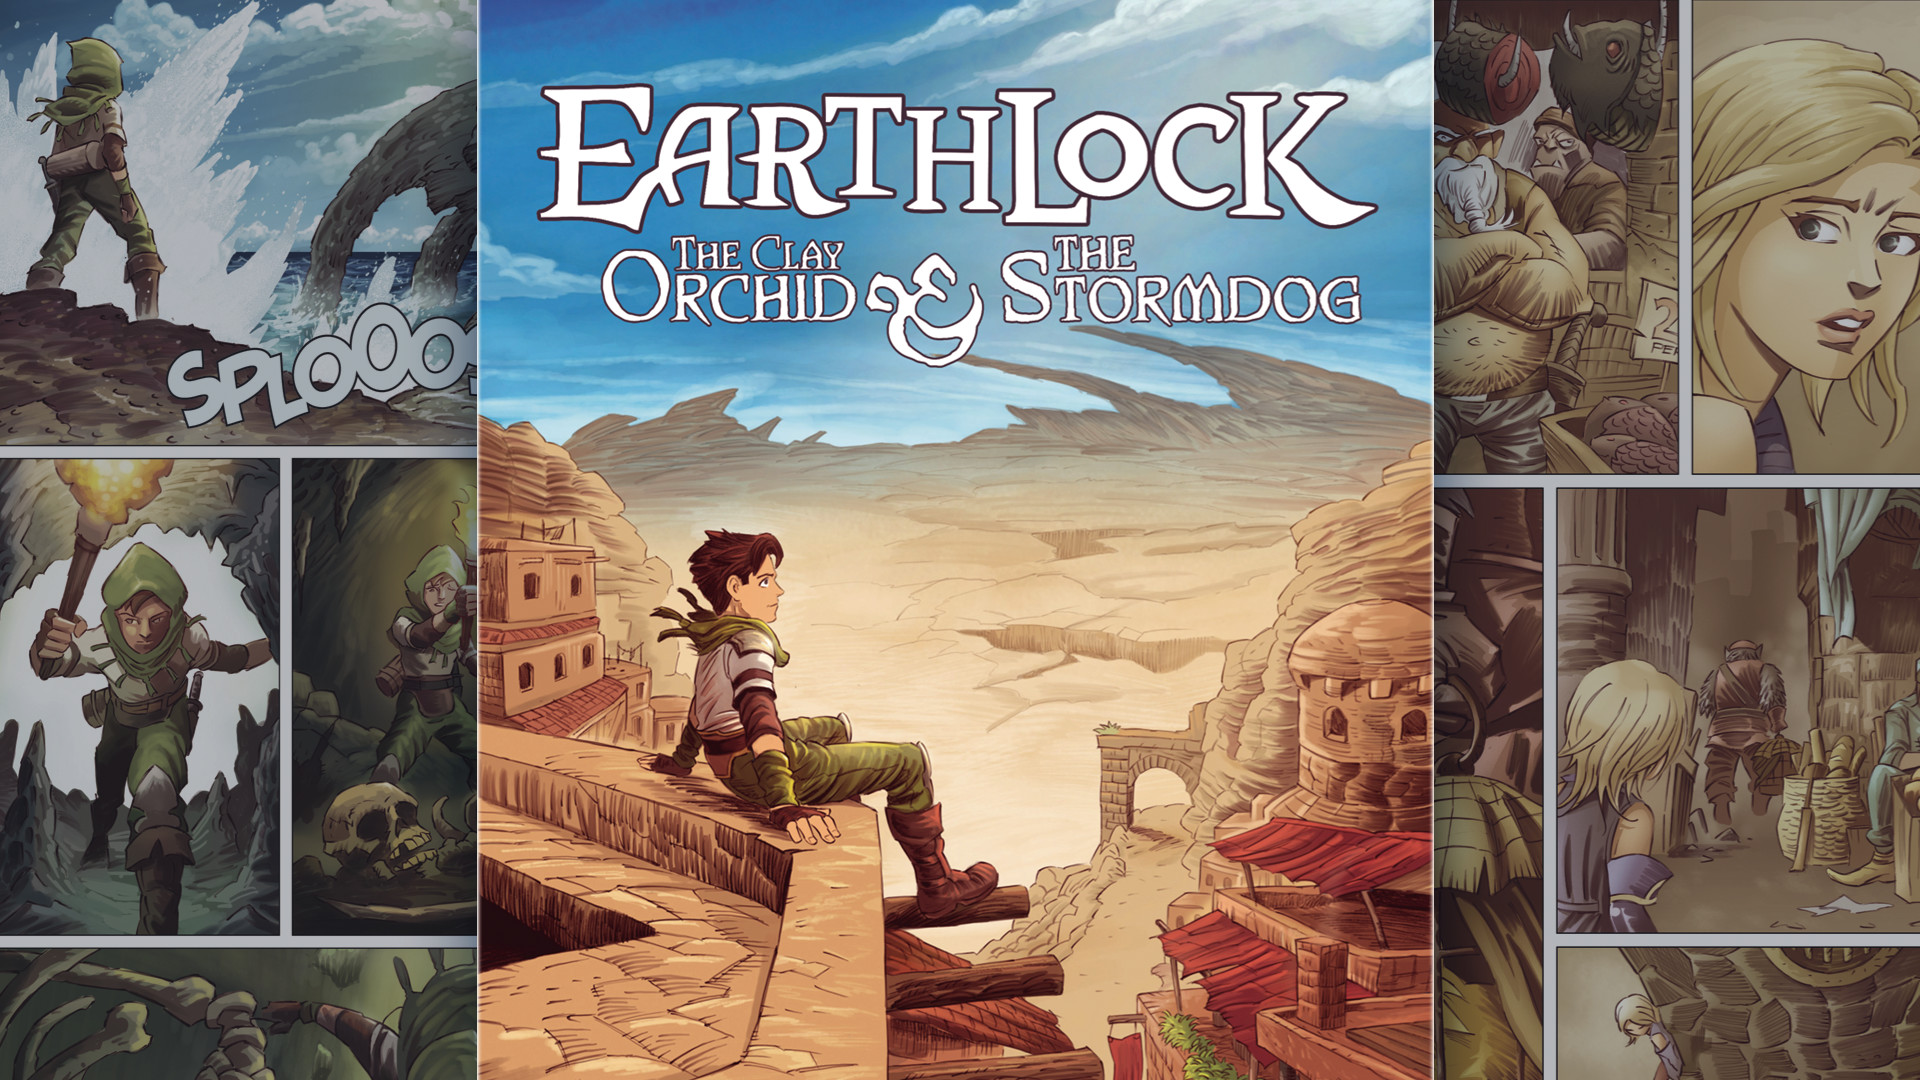 EARTHLOCK Comic Book #1: The Storm Dog & The Clay Orchid Featured Screenshot #1